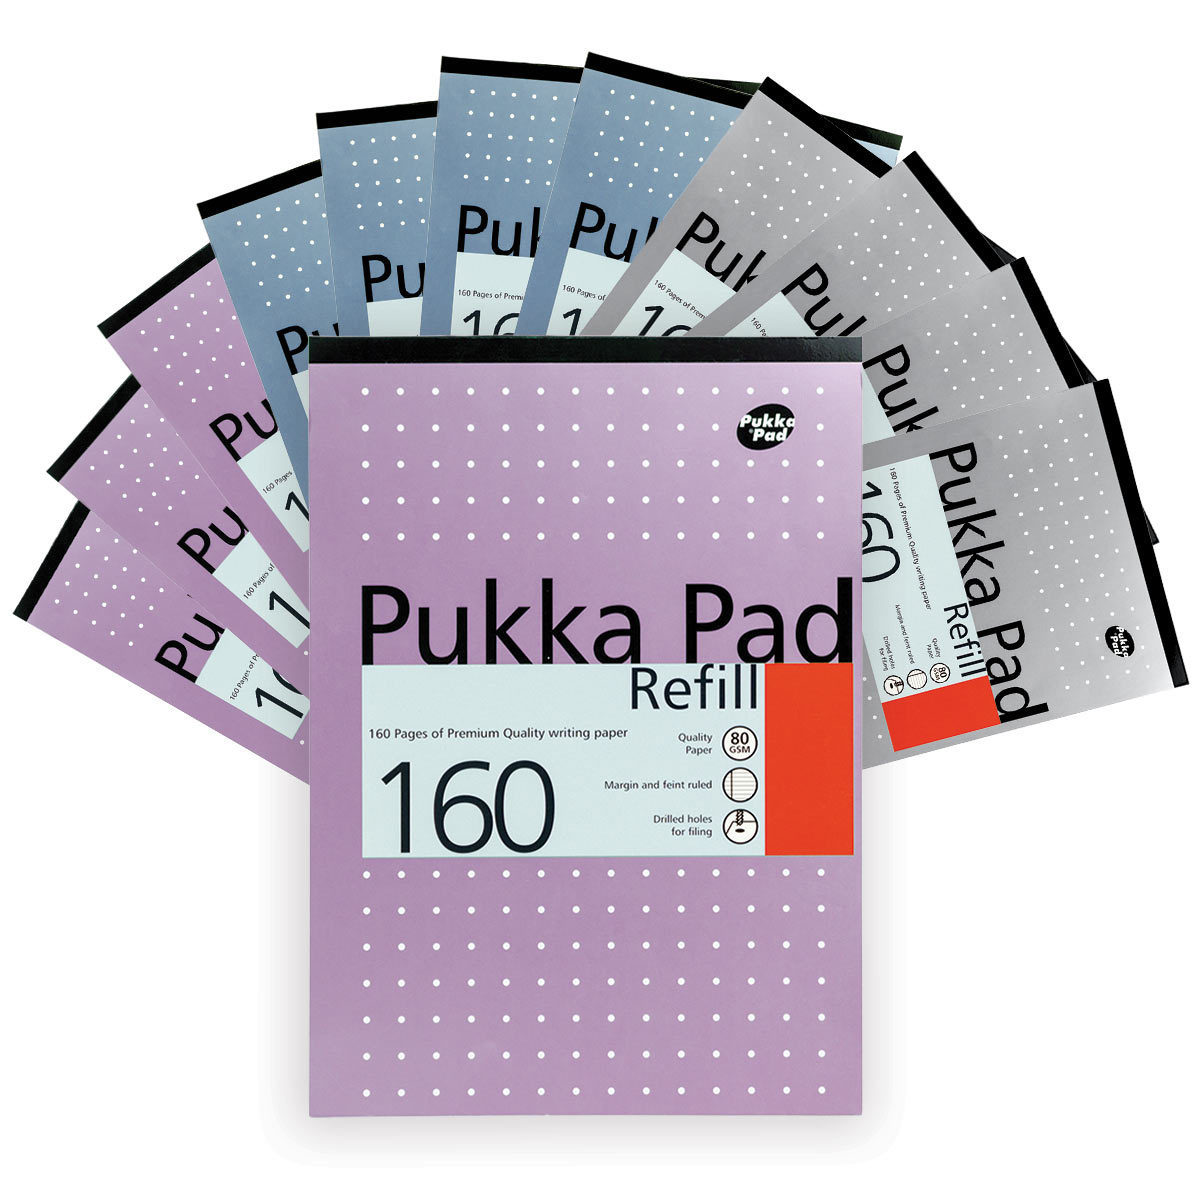 Pukka Pad A4 Refill Pad 160 Pages 80gsm Blue Pink Silver Punch Holes for Filing 